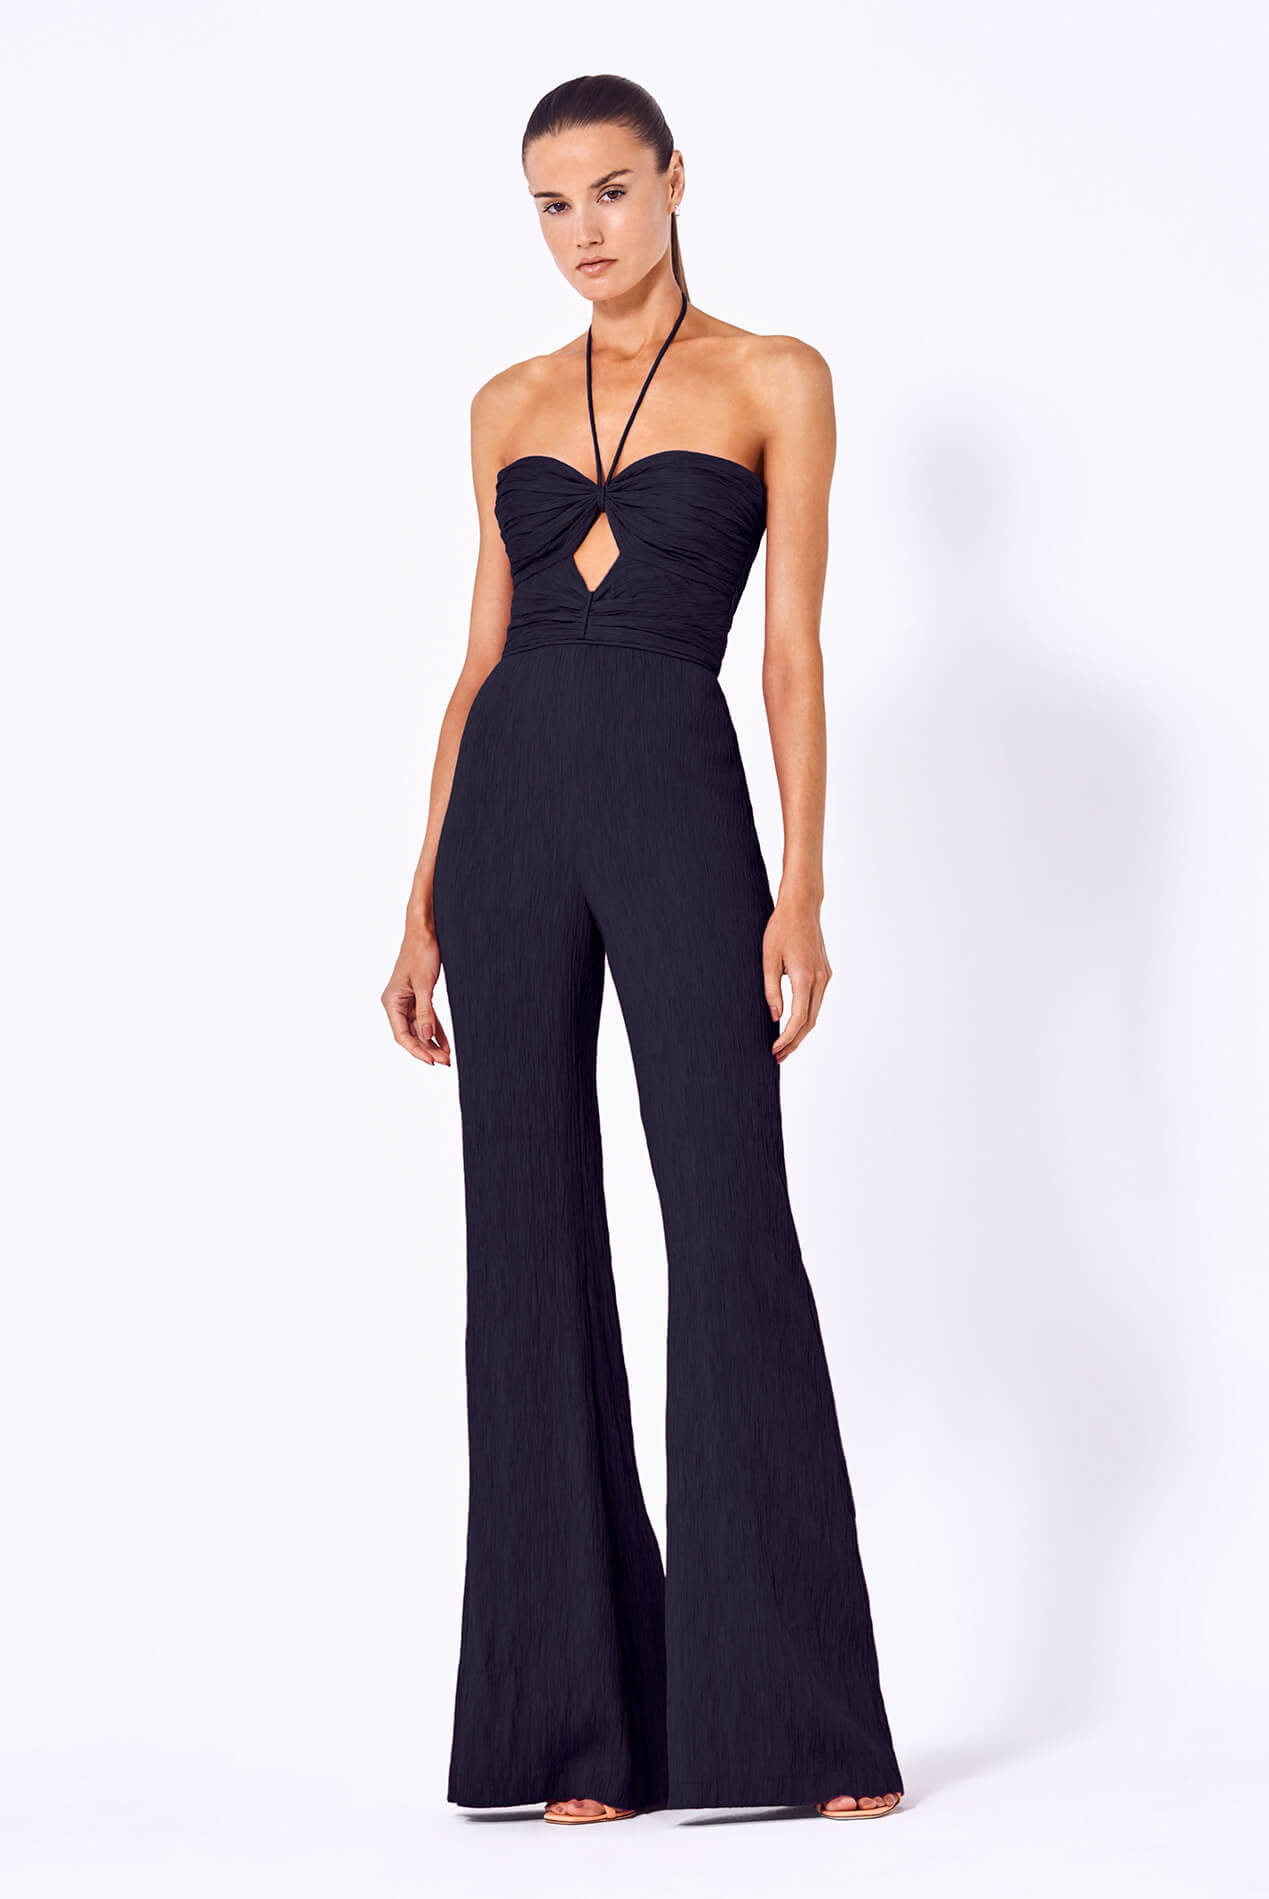 Alexis Jada Jumpsuit in Black from The New Trend